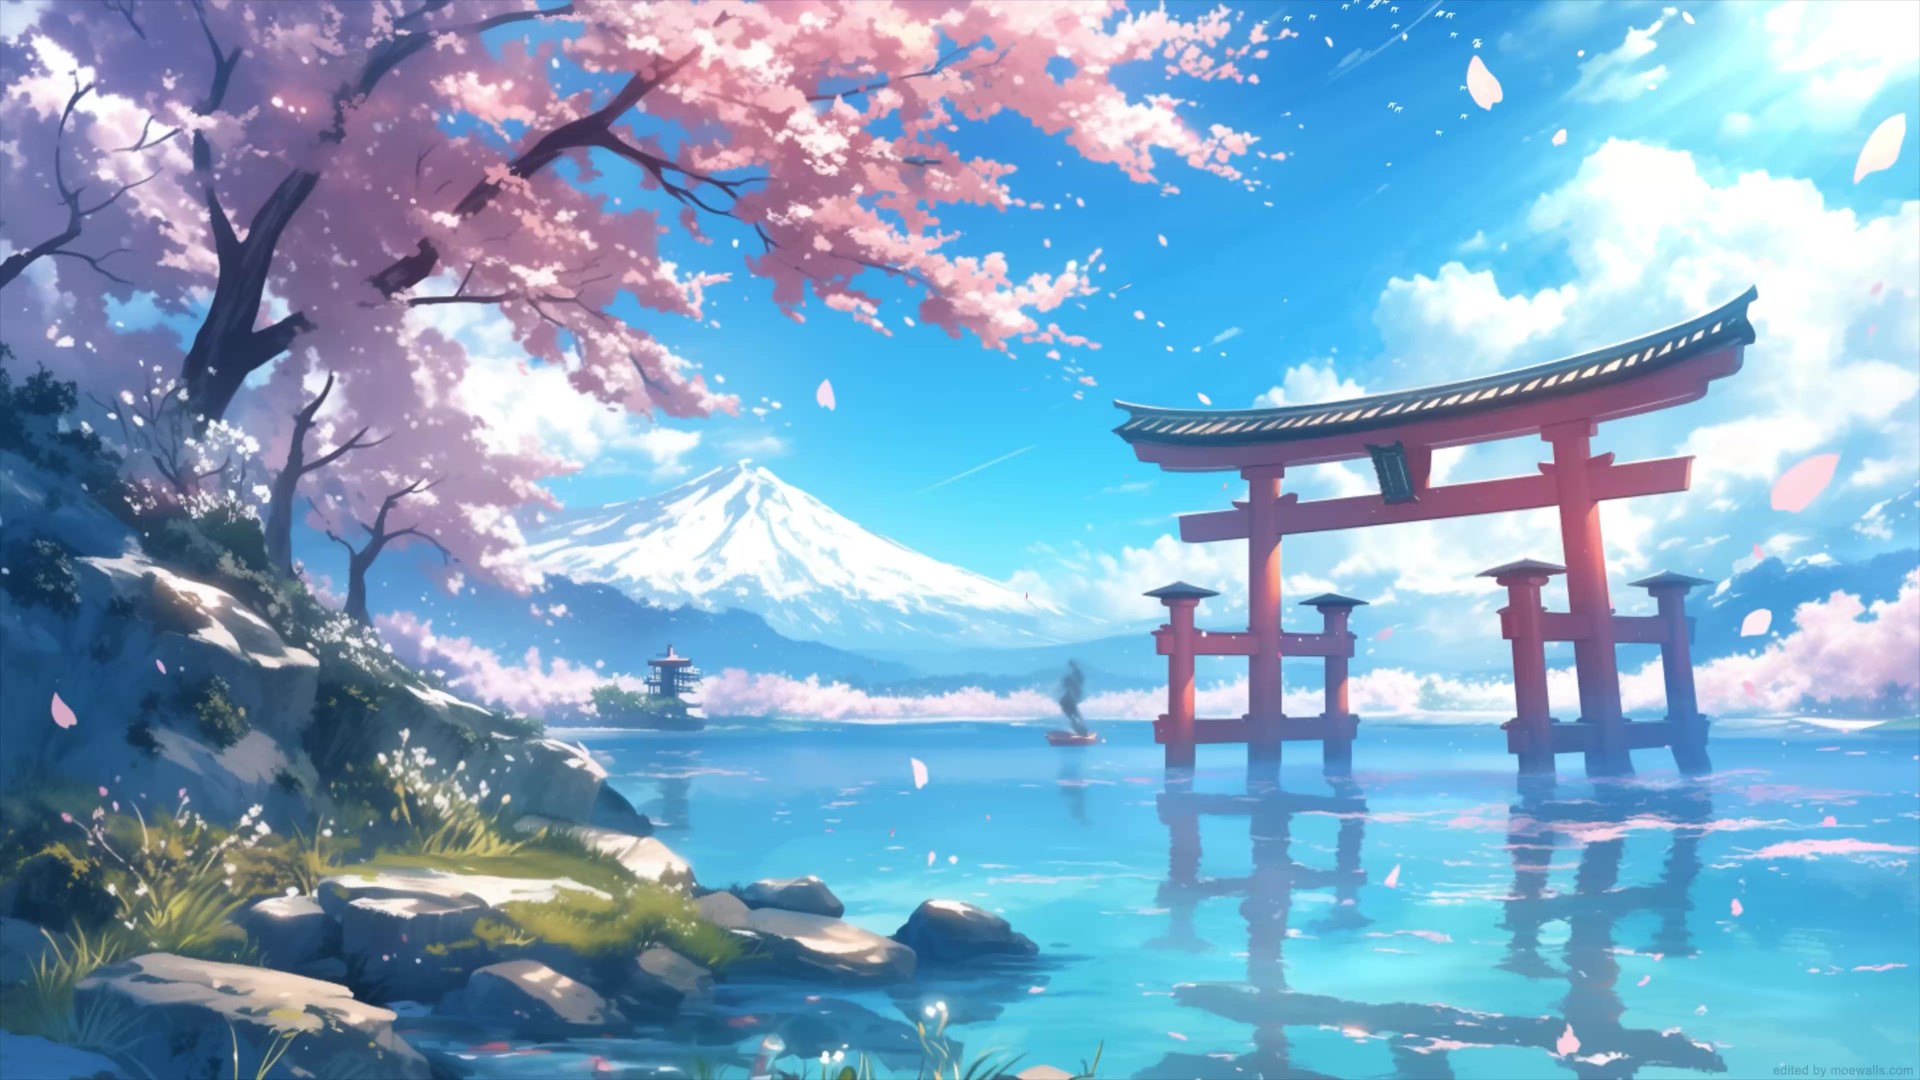 Whispers of the, Anime Landscape Poster | Zazzle | Anime scenery wallpaper,  Cool wallpapers art, Pretty wallpapers